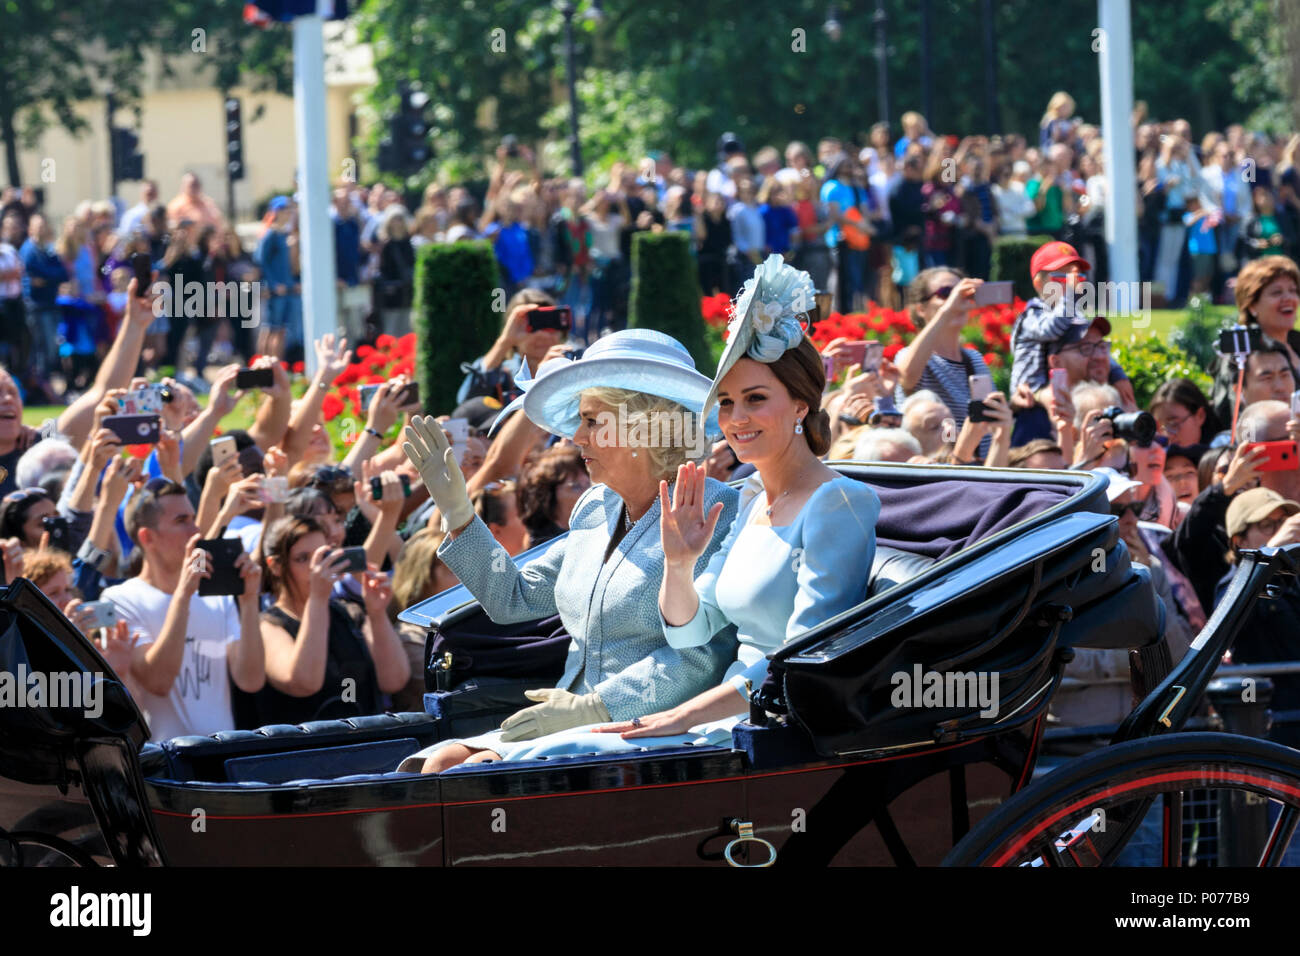 The Mall, London, UK, 9th June 2018. Catherine, Duchess of Cambridge and Camilla, Duchess of Cornwall in their carriage. The Sovereign's birthday is officially celebrated by the ceremony of Trooping the Colour, the Queen's Birthday Parade. Troops from the  Household Division, overall 1400 officers and soldiers are on parade, together with two hundred horses; over four hundred musicians from ten bands and corps of drums. The parade route extends from Buckingham Palace along The Mall to Horse Guards Parade, Whitehall and back again. Credit: Imageplotter News and Sports/Alamy Live News Stock Photo